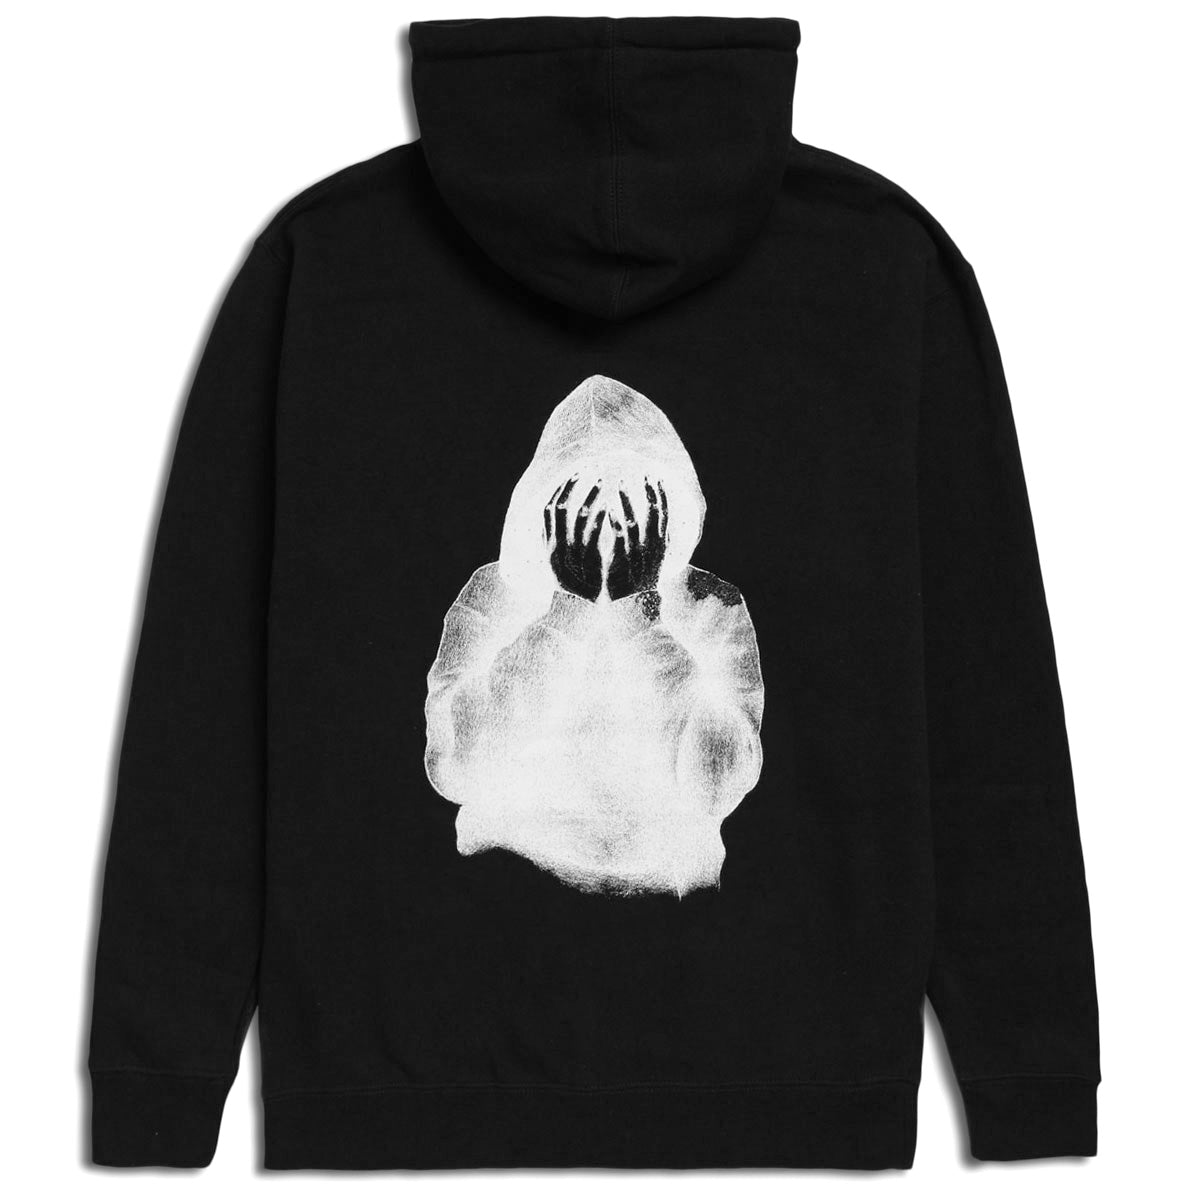 CCS Smile on the Surface Zip Hoodie - Black/White image 1